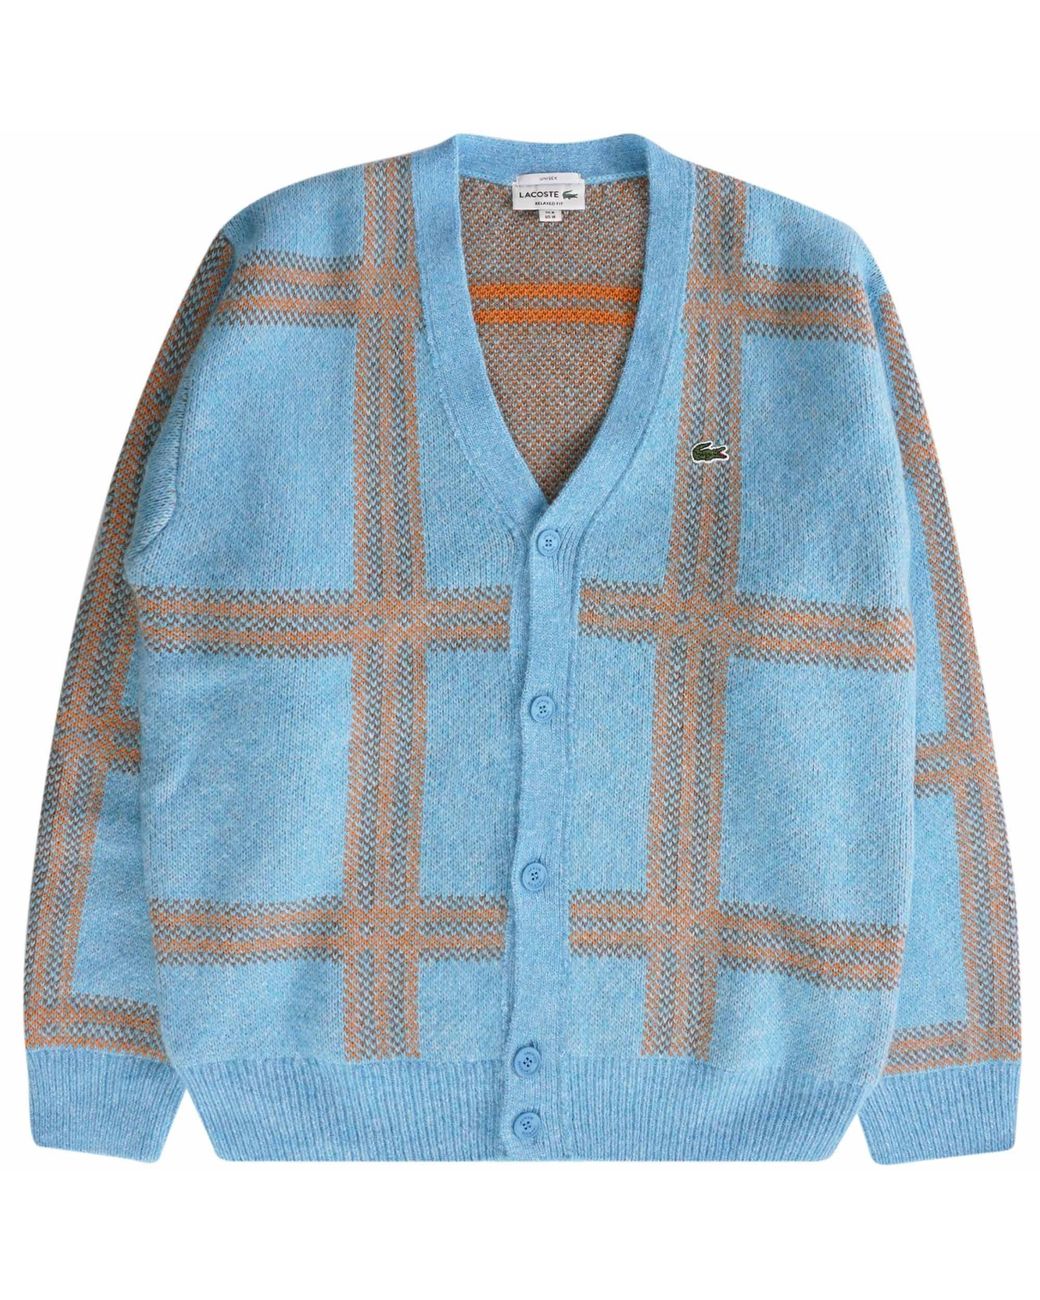 Lacoste Checked Blend Wool Jacquard Cardigan - Multi in Blue for Men ...